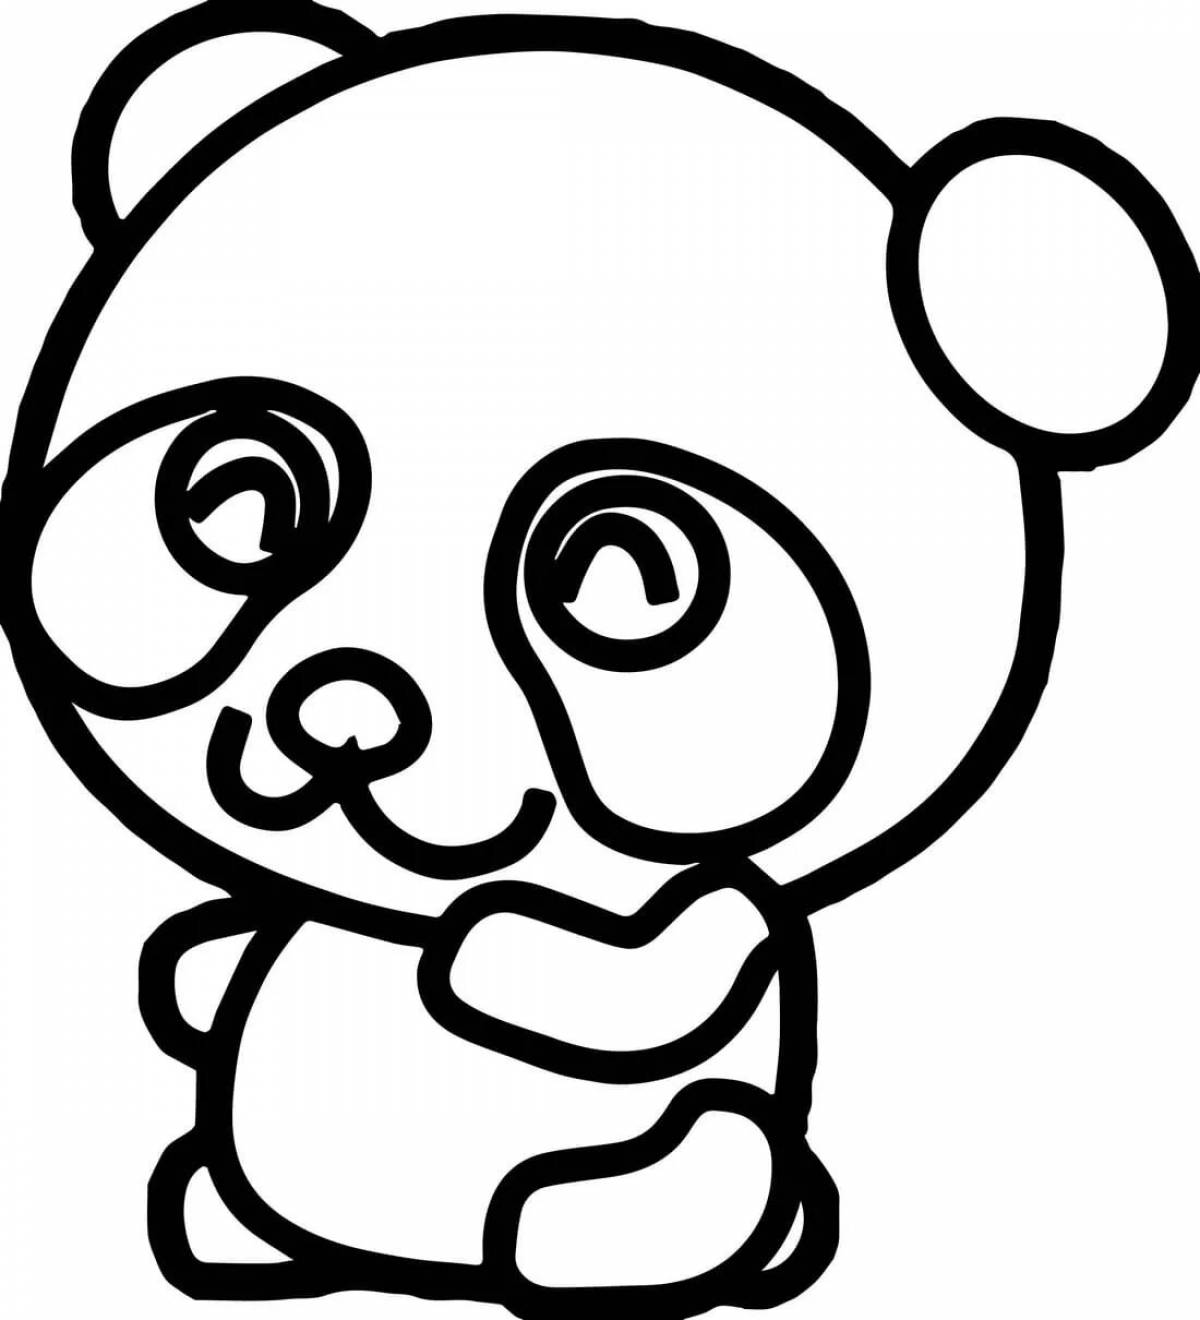 Colorful and cute teddy bear coloring book